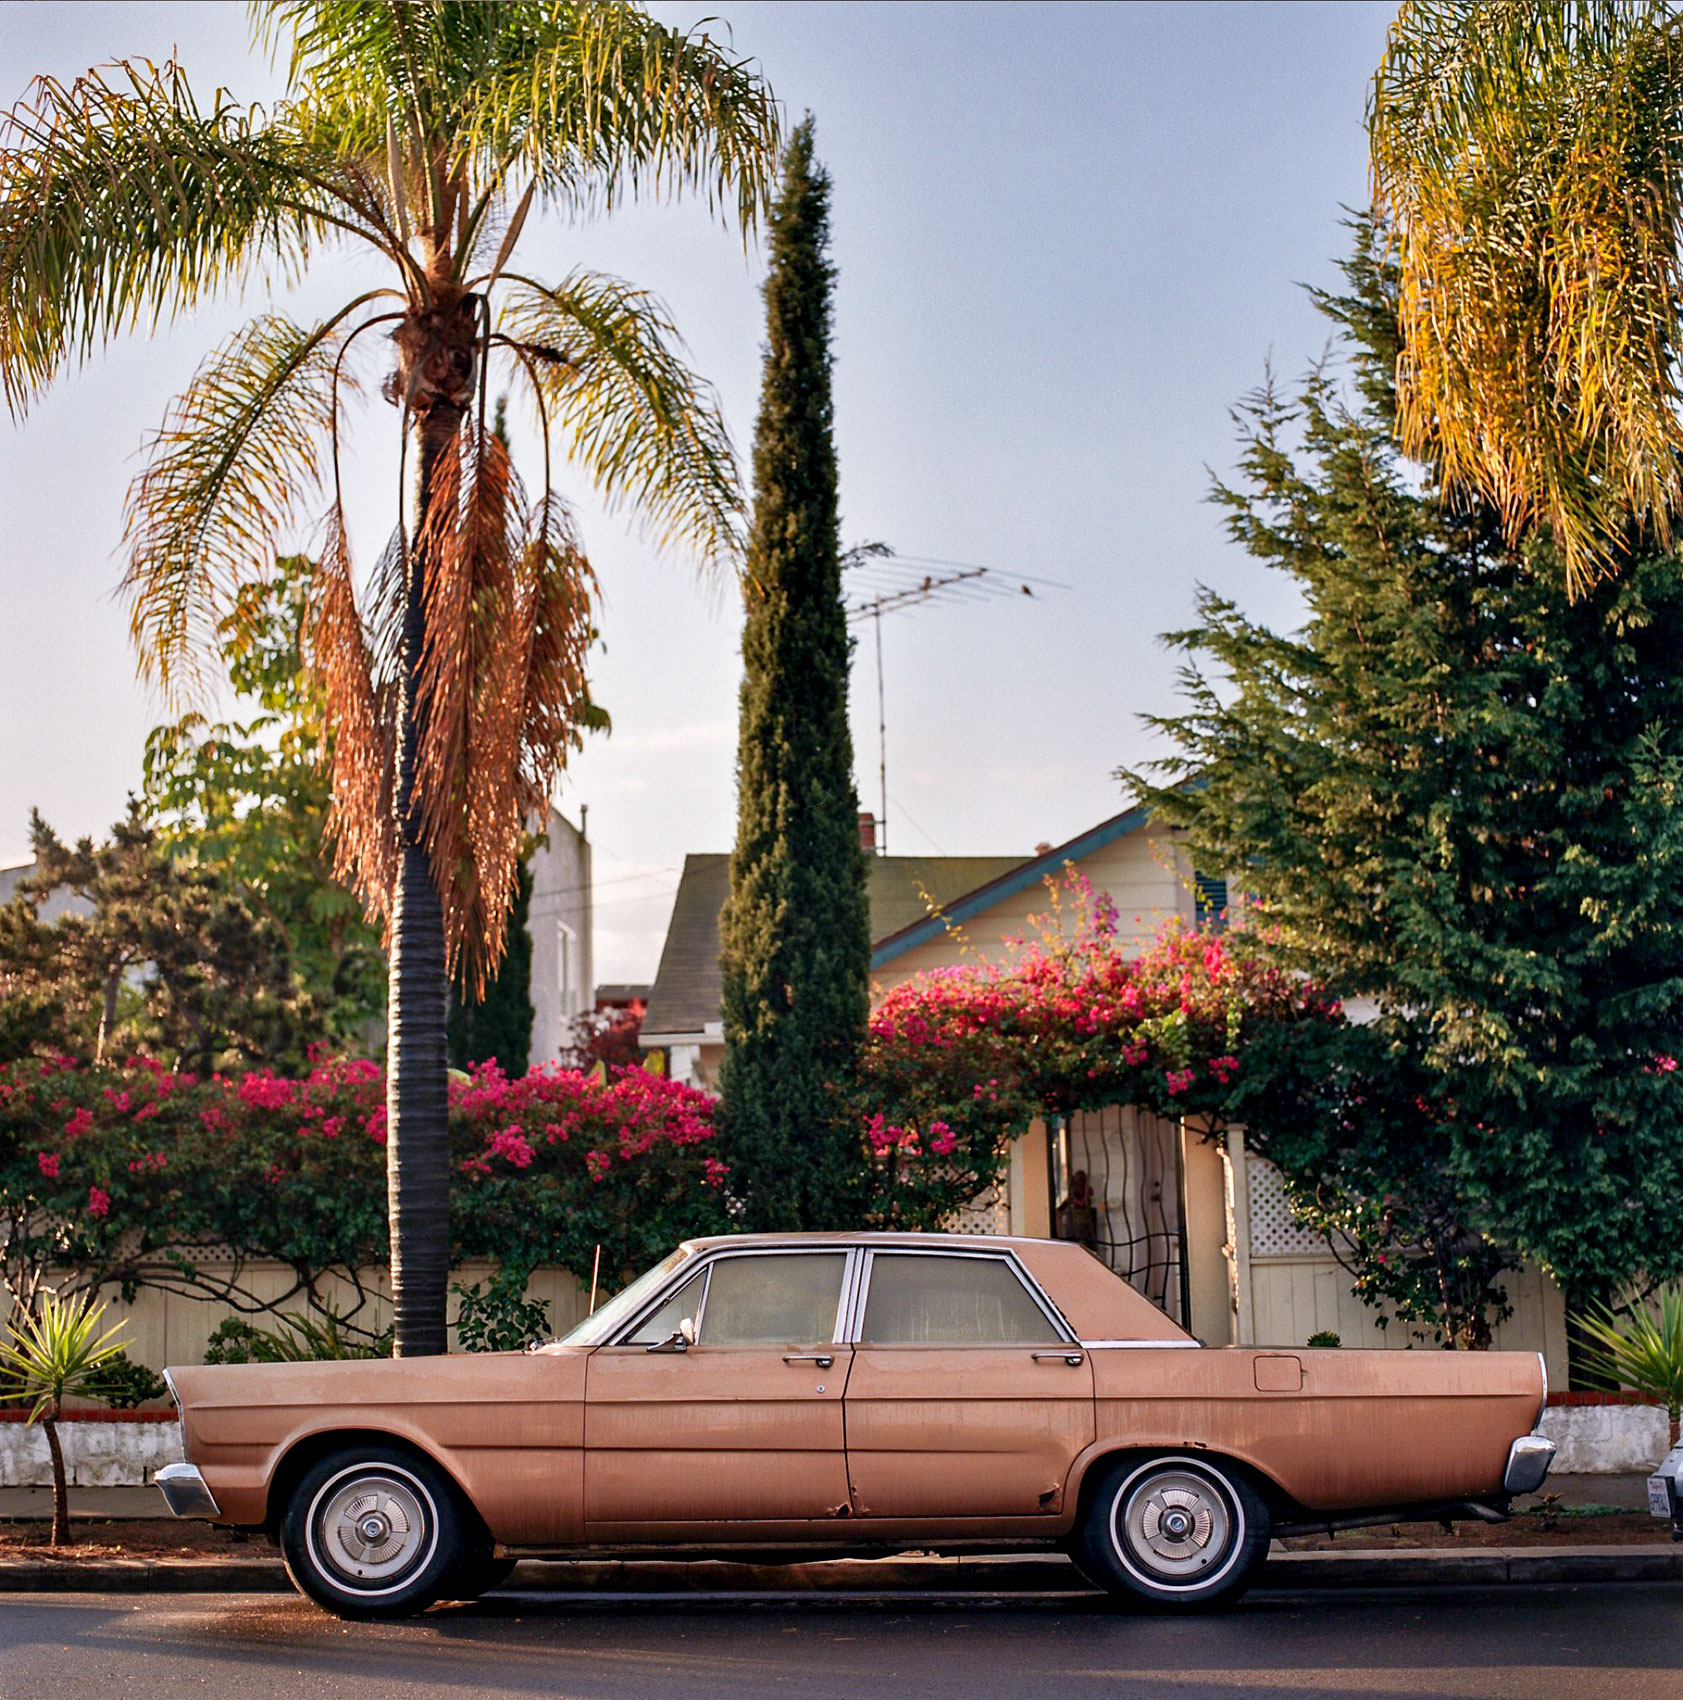 A-CLASSIC-VINTAGE-CAR-SITS-ON-A-STREET-IN-SAN-DIEGO-DURING-SUNRISE-IN-CALIFORNIA